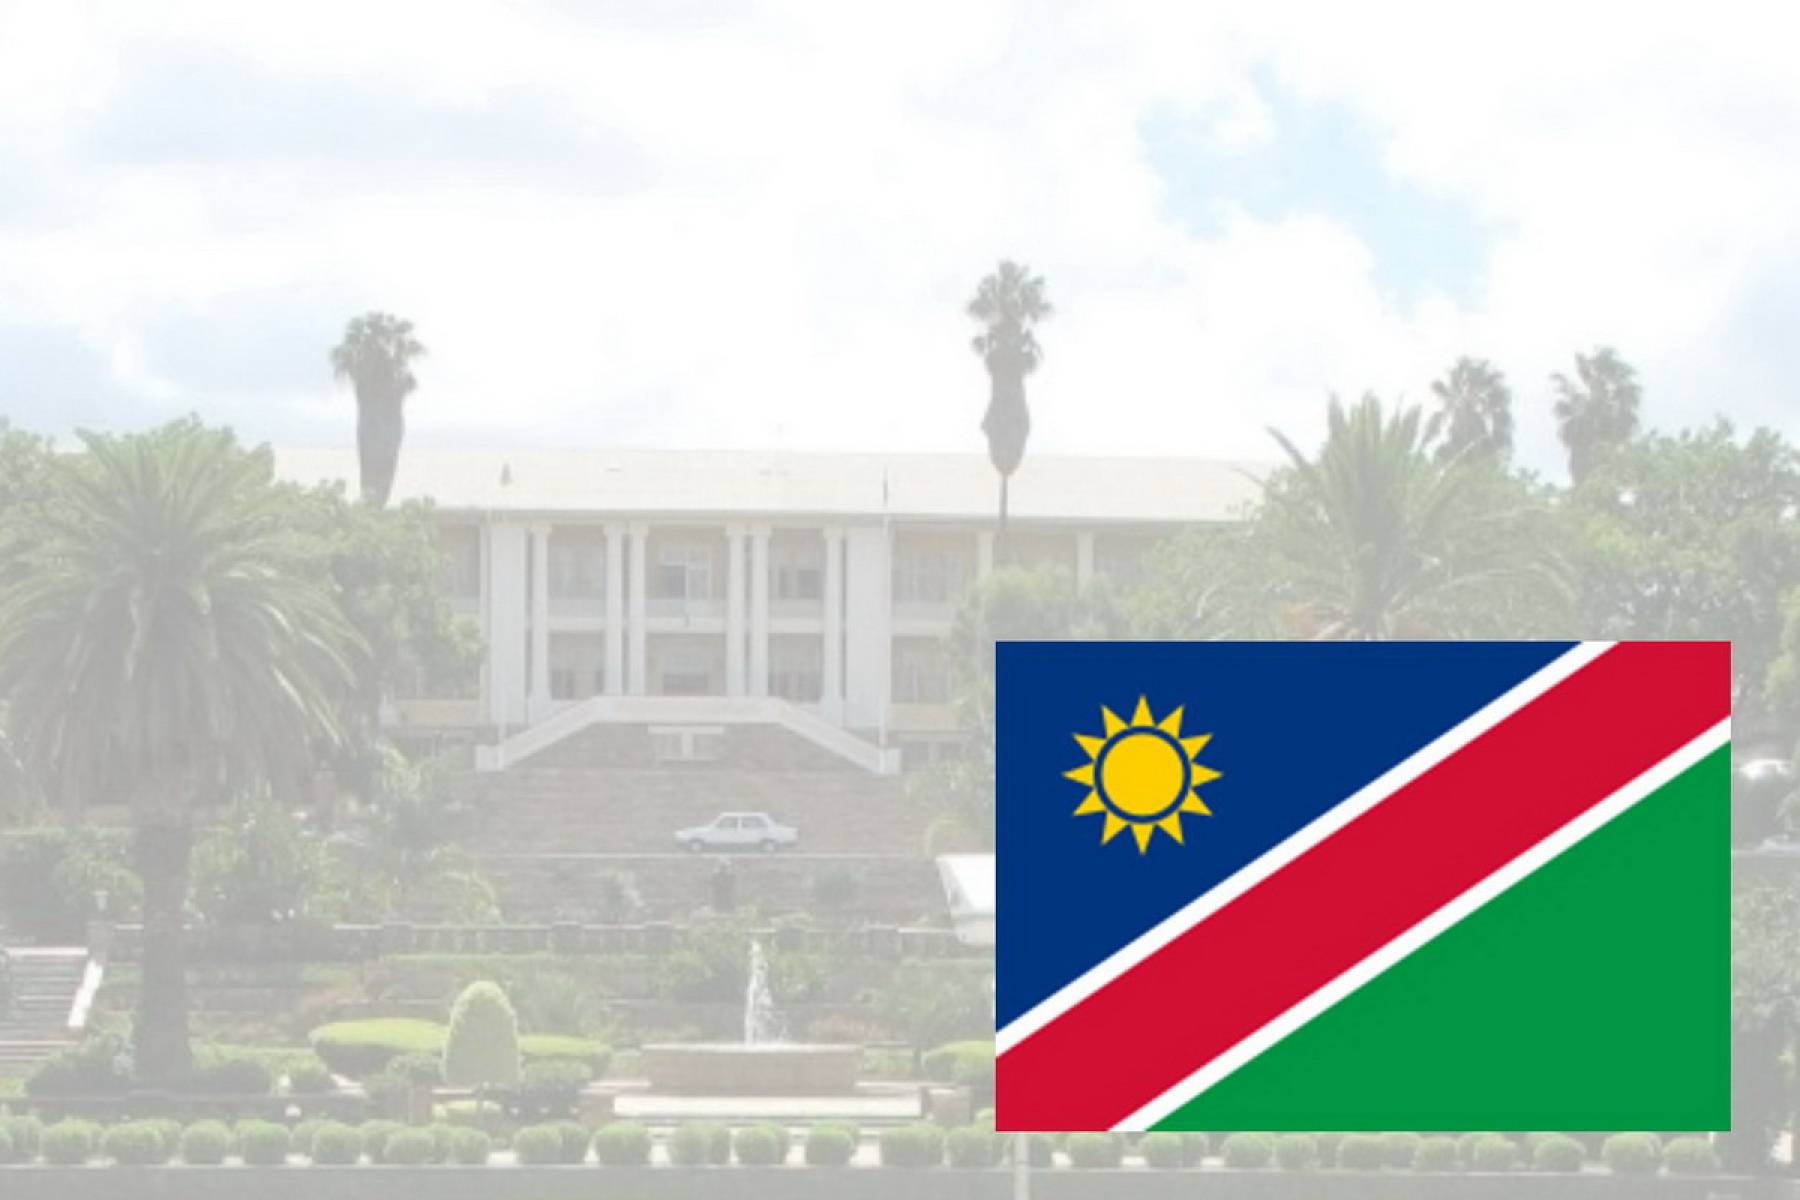 Independence Day of the Republic of Namibia, 21 March